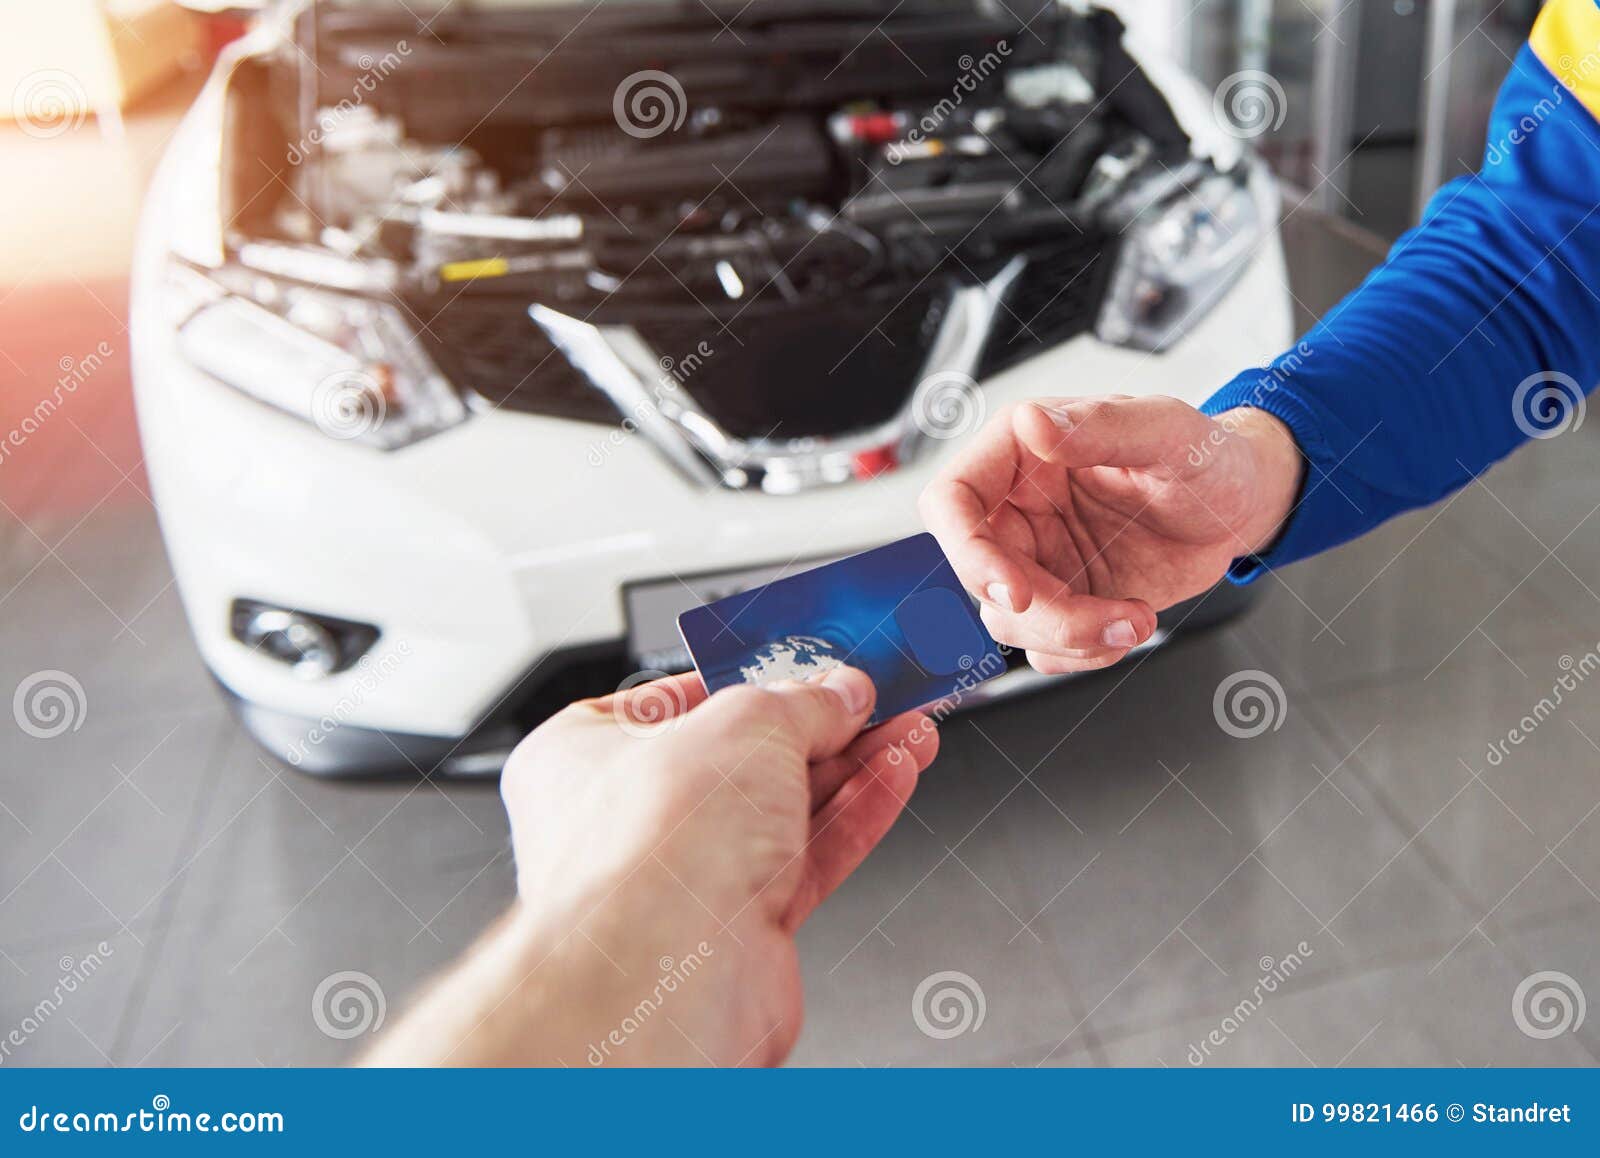 Hands of Car Mechanic with Wrench in Garage, Payment by Credit Card